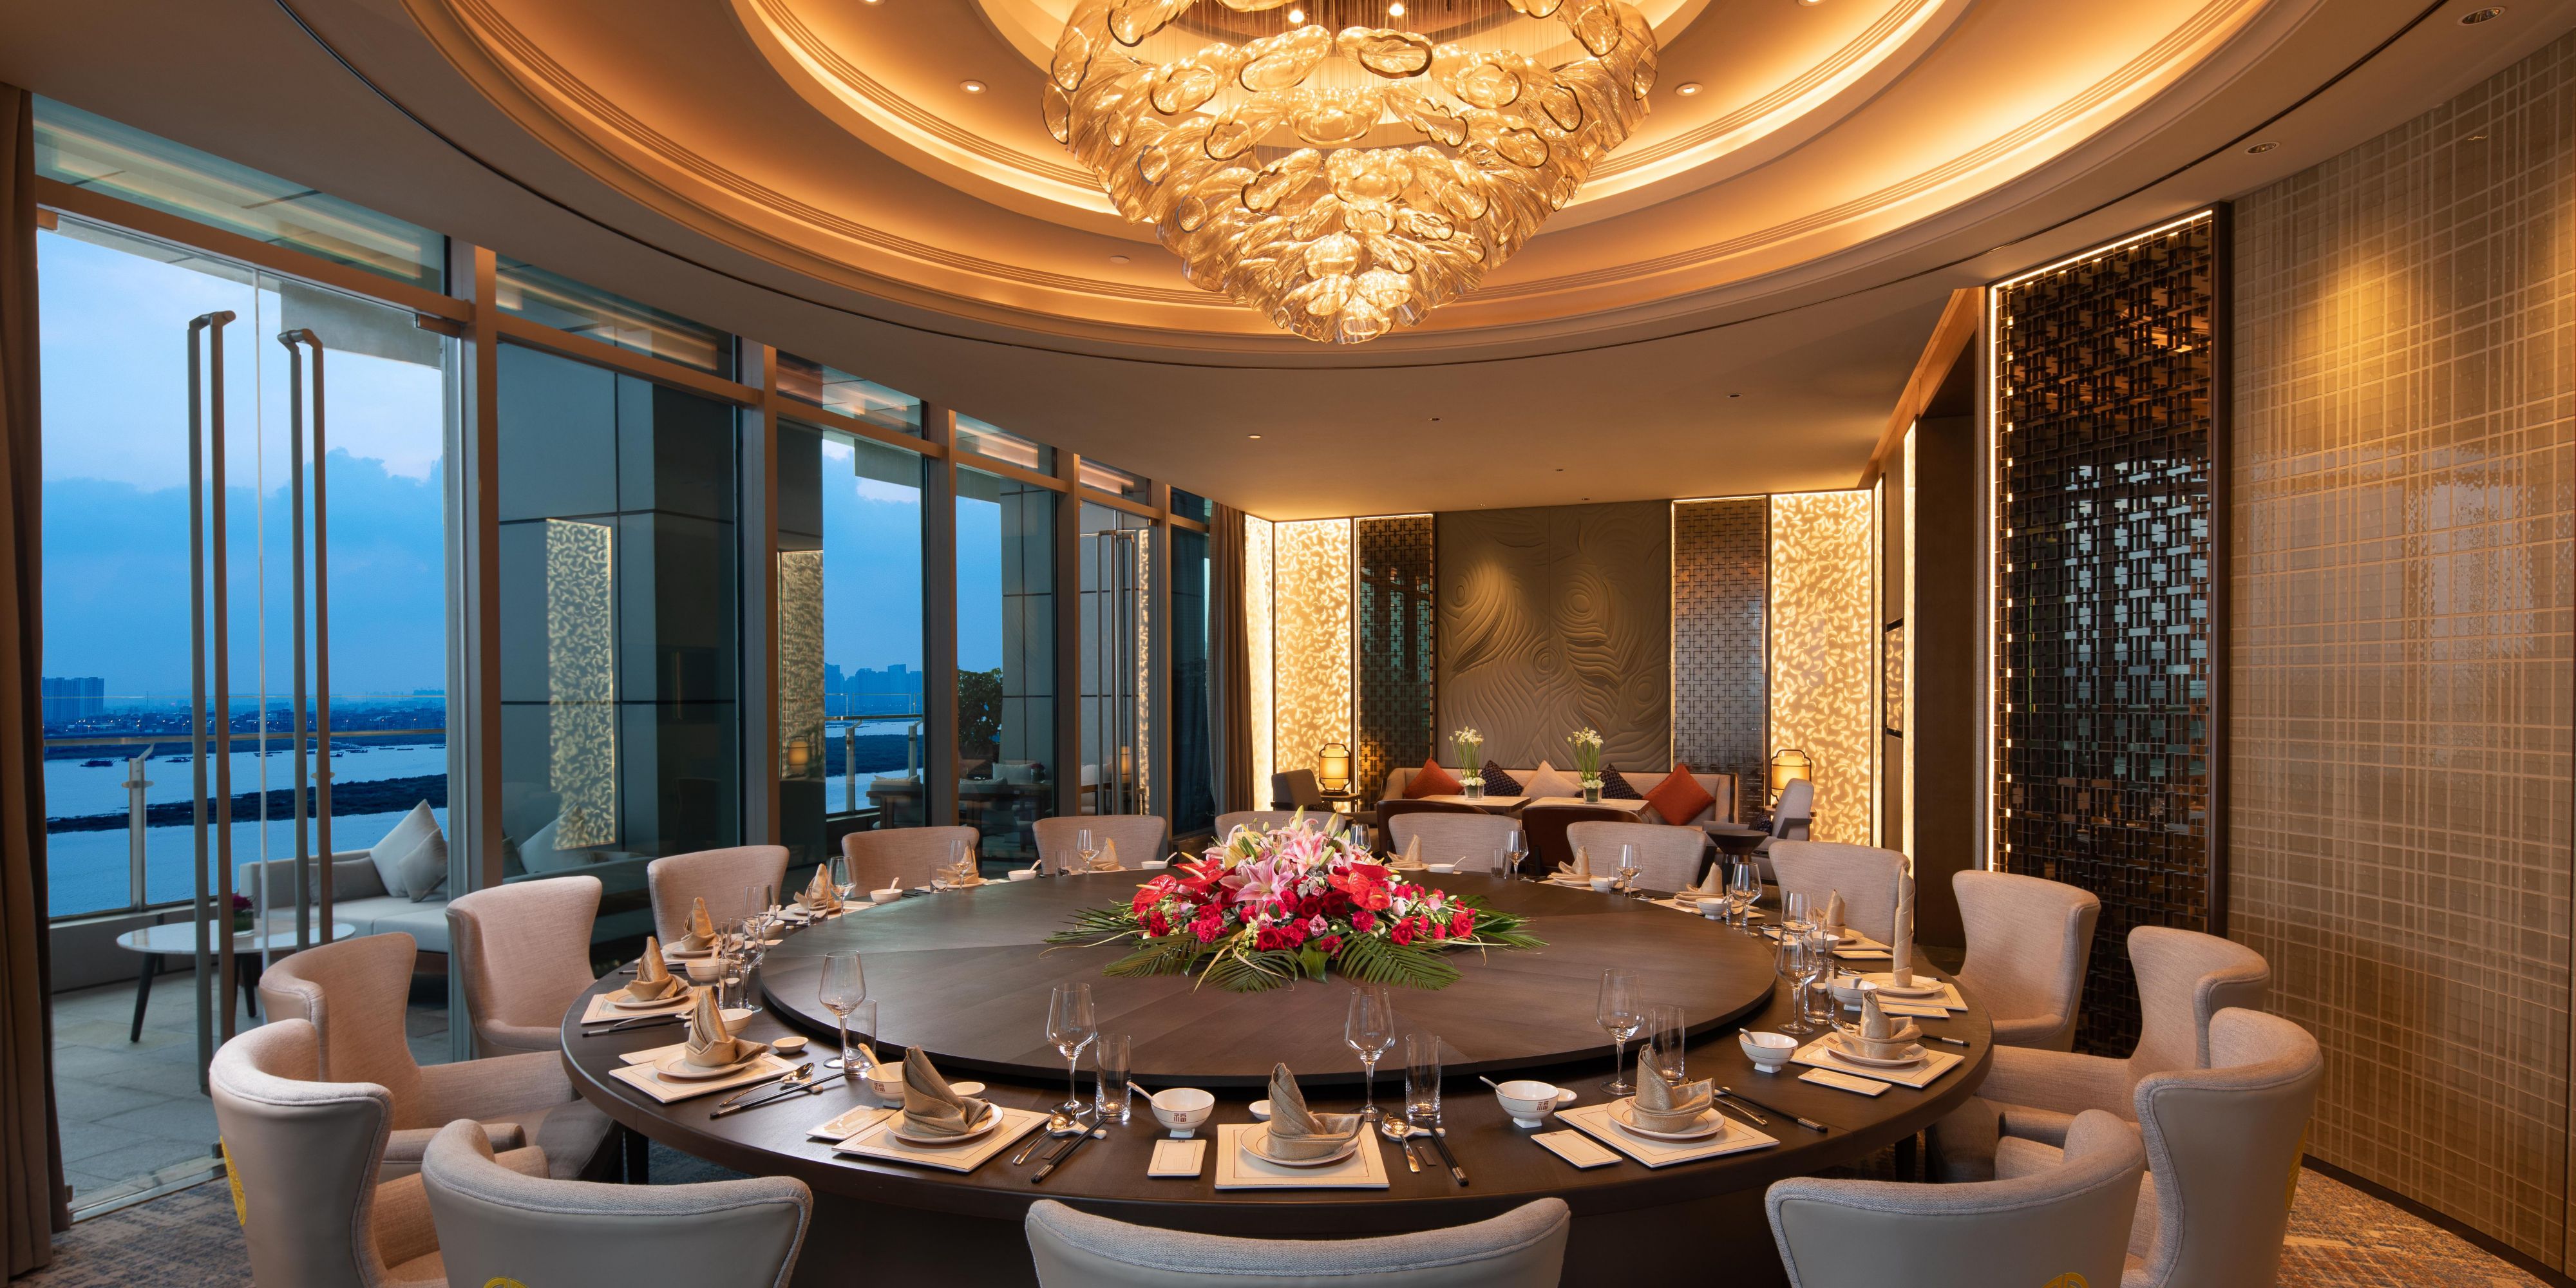 Taifu Restaurant is located on the 5th floor of InterContinental Quanzhou, mainly serving authentic Cantonese cuisine. Taifu Restaurant creates the wonderful taste buds with craftsmanship to become the preferred choice for your business banquets and family gatherings.